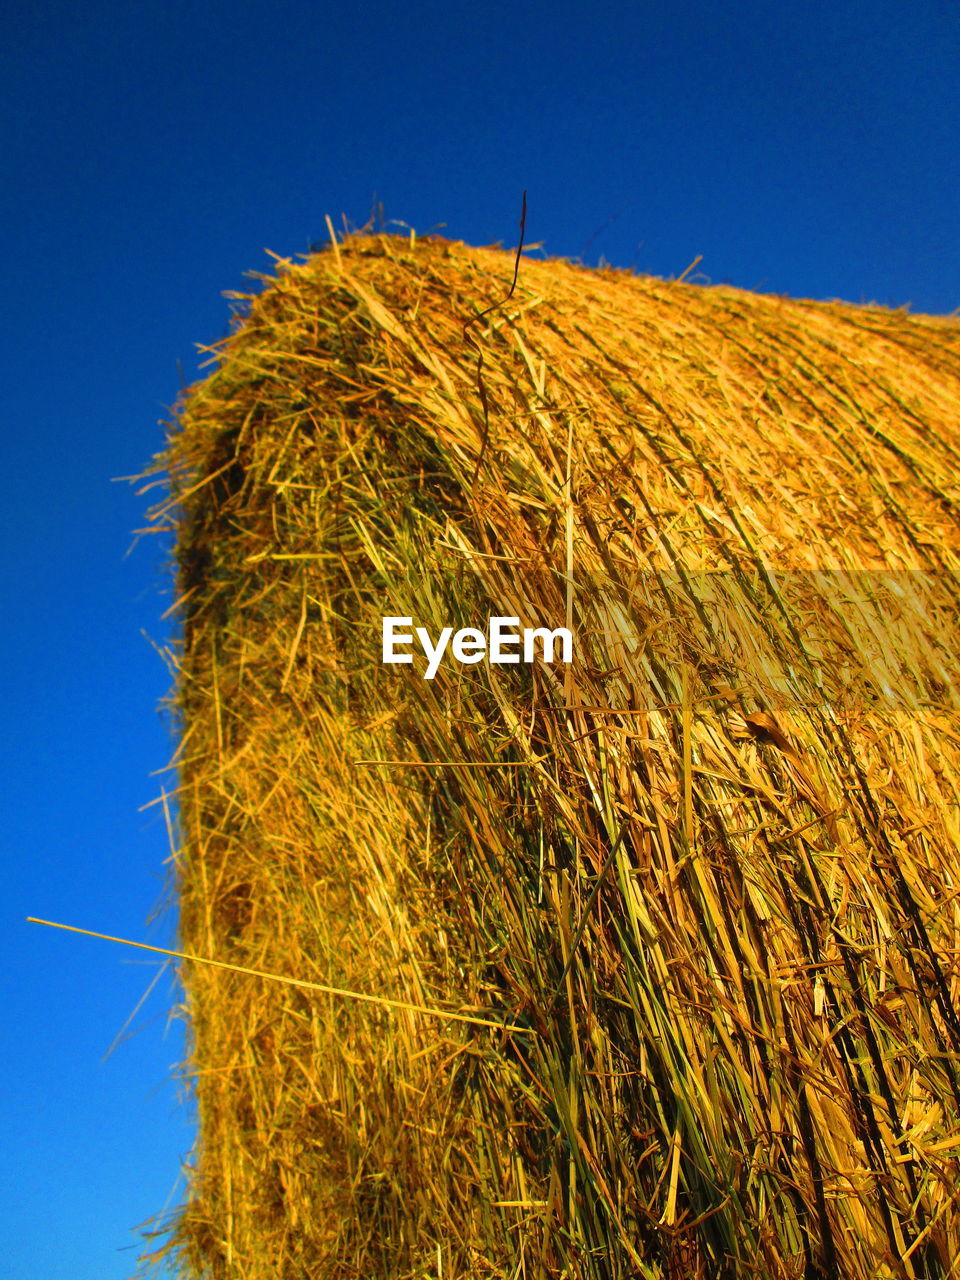 LOW ANGLE VIEW OF HAY BALES ON FIELD AGAINST BLUE SKY